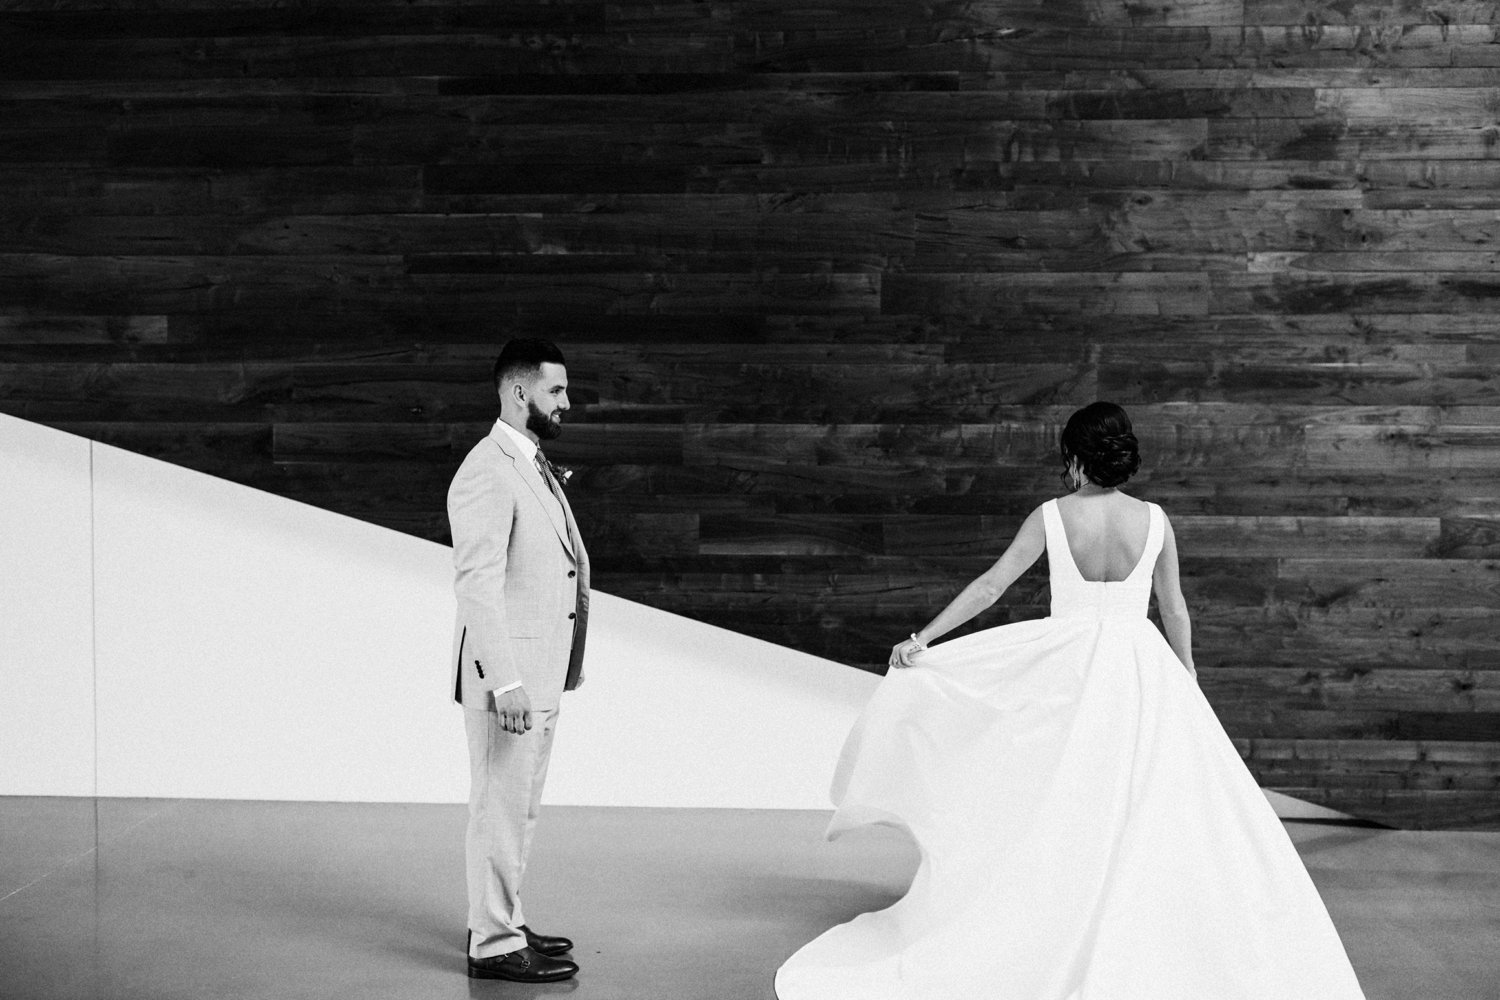  images by feliciathephotographer.com | destination wedding photographer | kansas city | spring time | details | first look | getting ready | pre ceremony | black and white | grey suit | the black tux | white satin a line gown | davids bridal | twirl | contrast | 